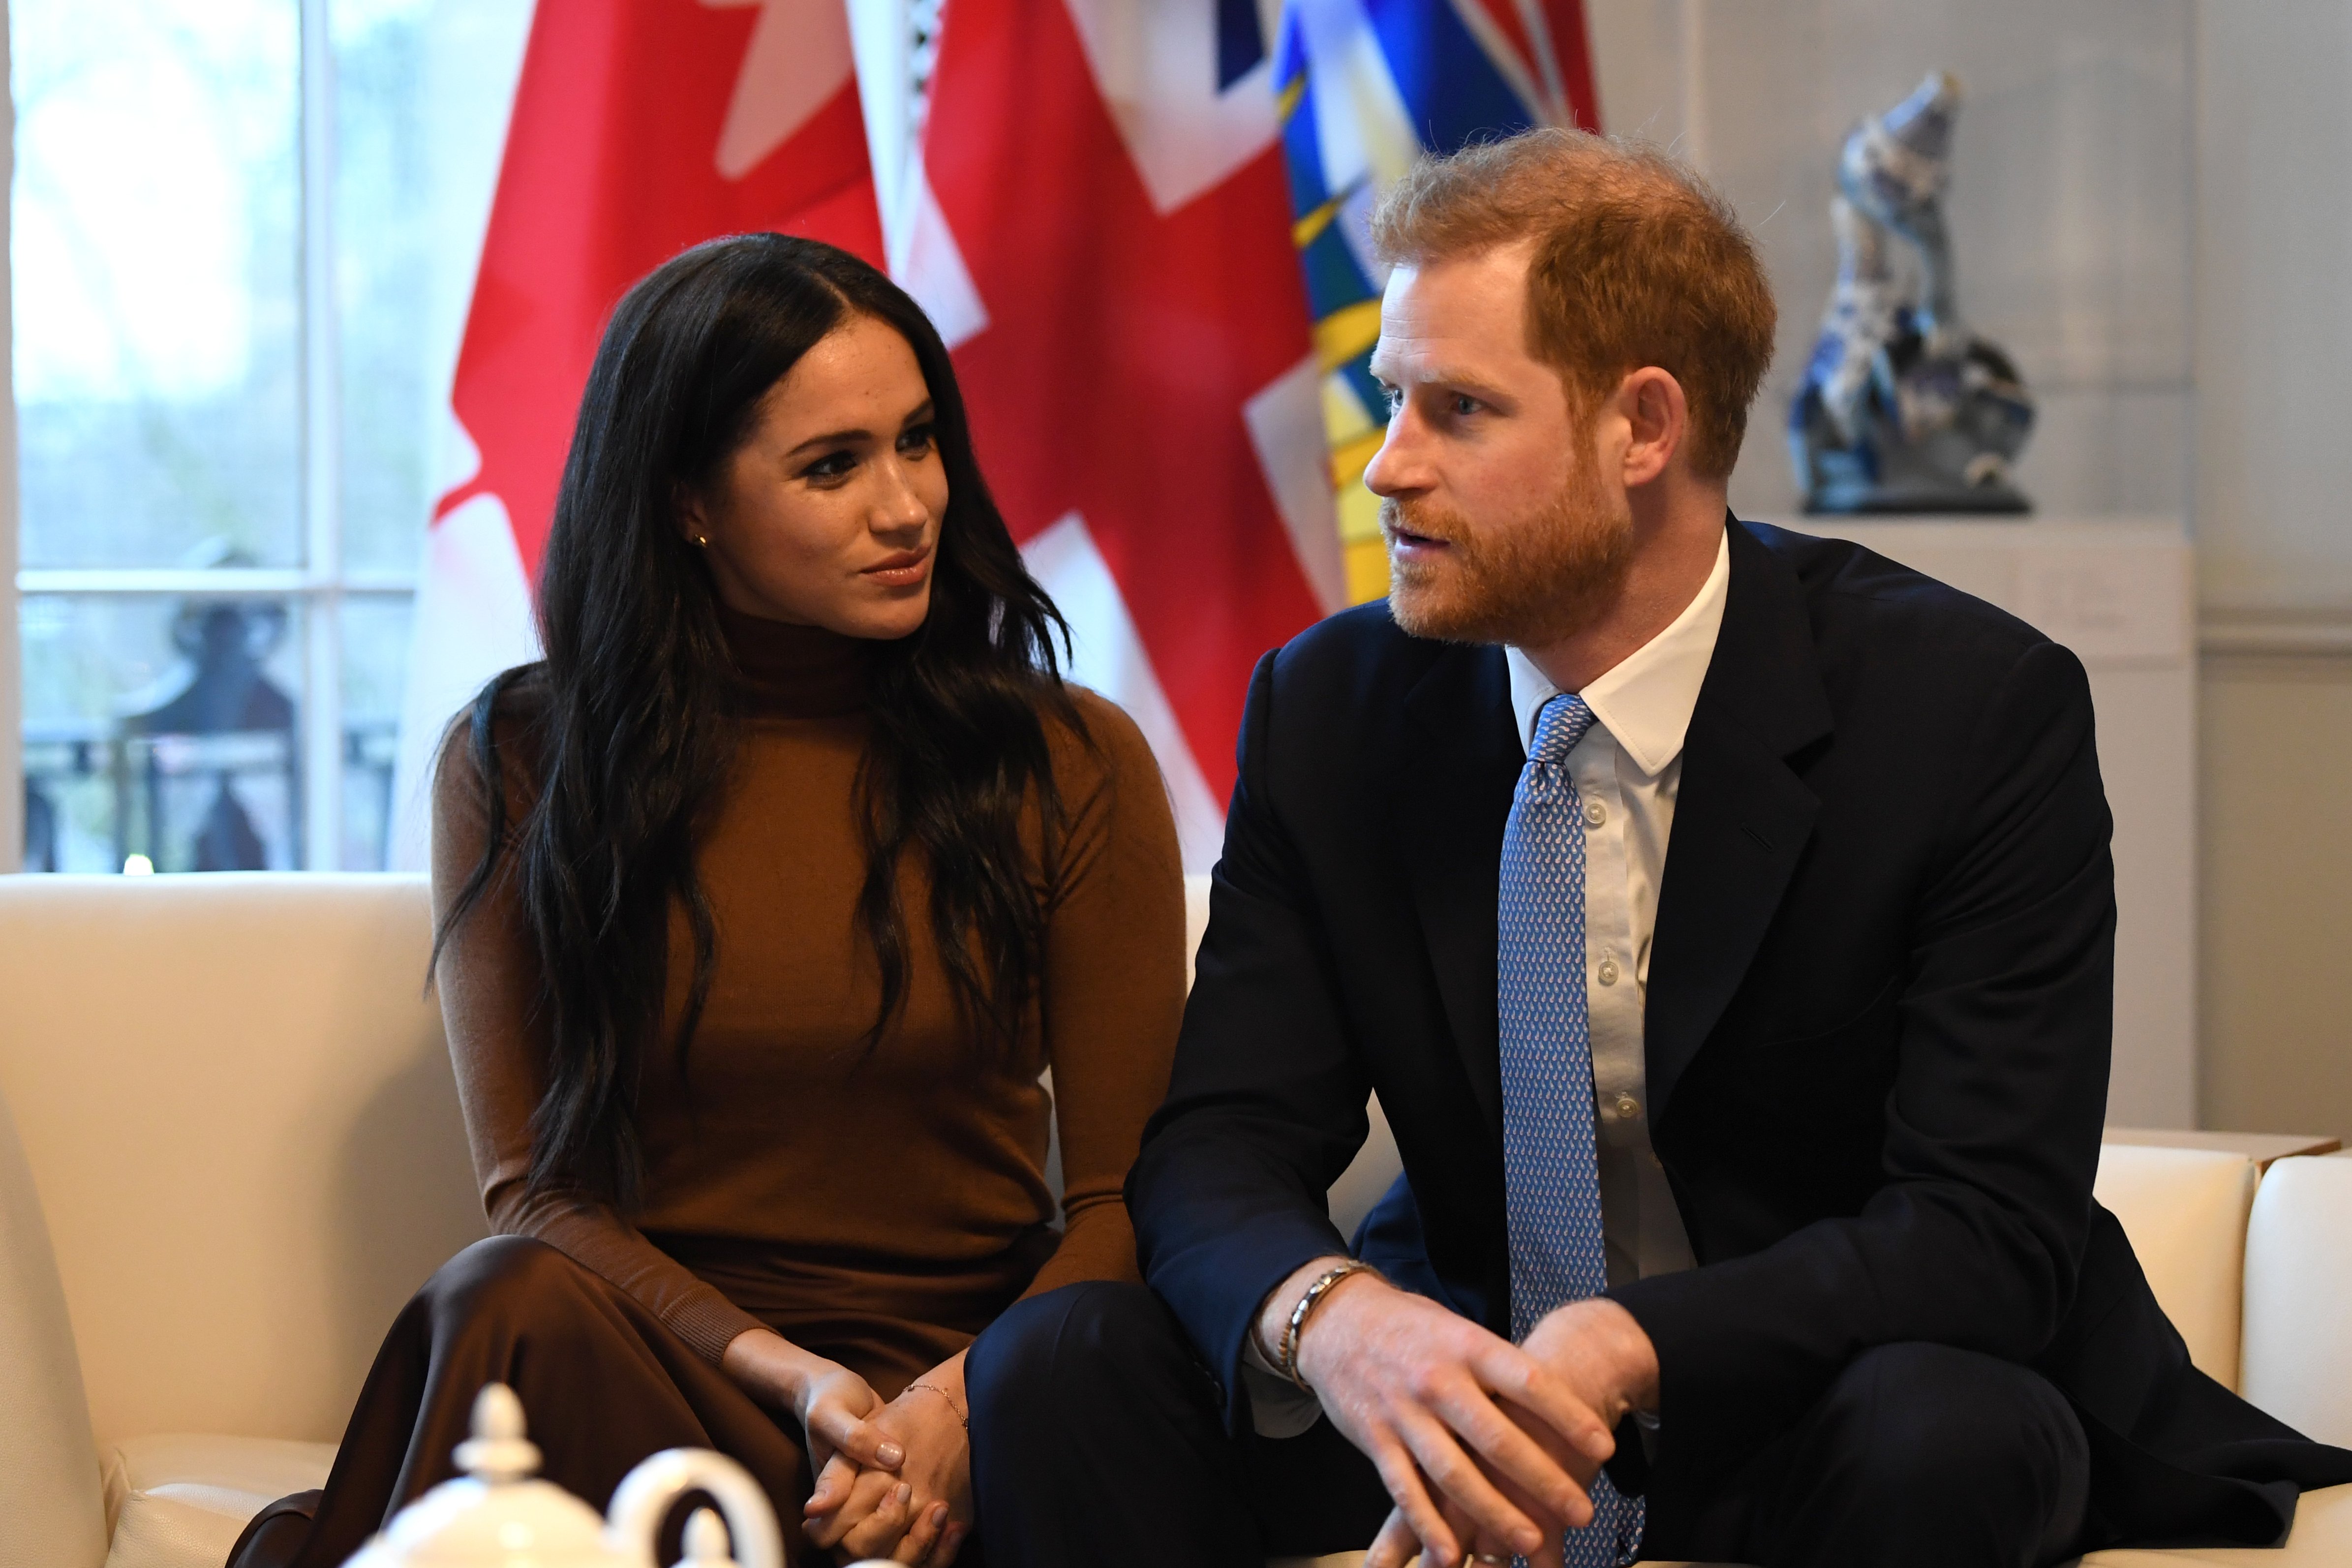 Prince Harry, Duke of Sussex and Meghan, Duchess of Sussex during their visit to Canada House on January 7, 2020 | Photo: GettyImages